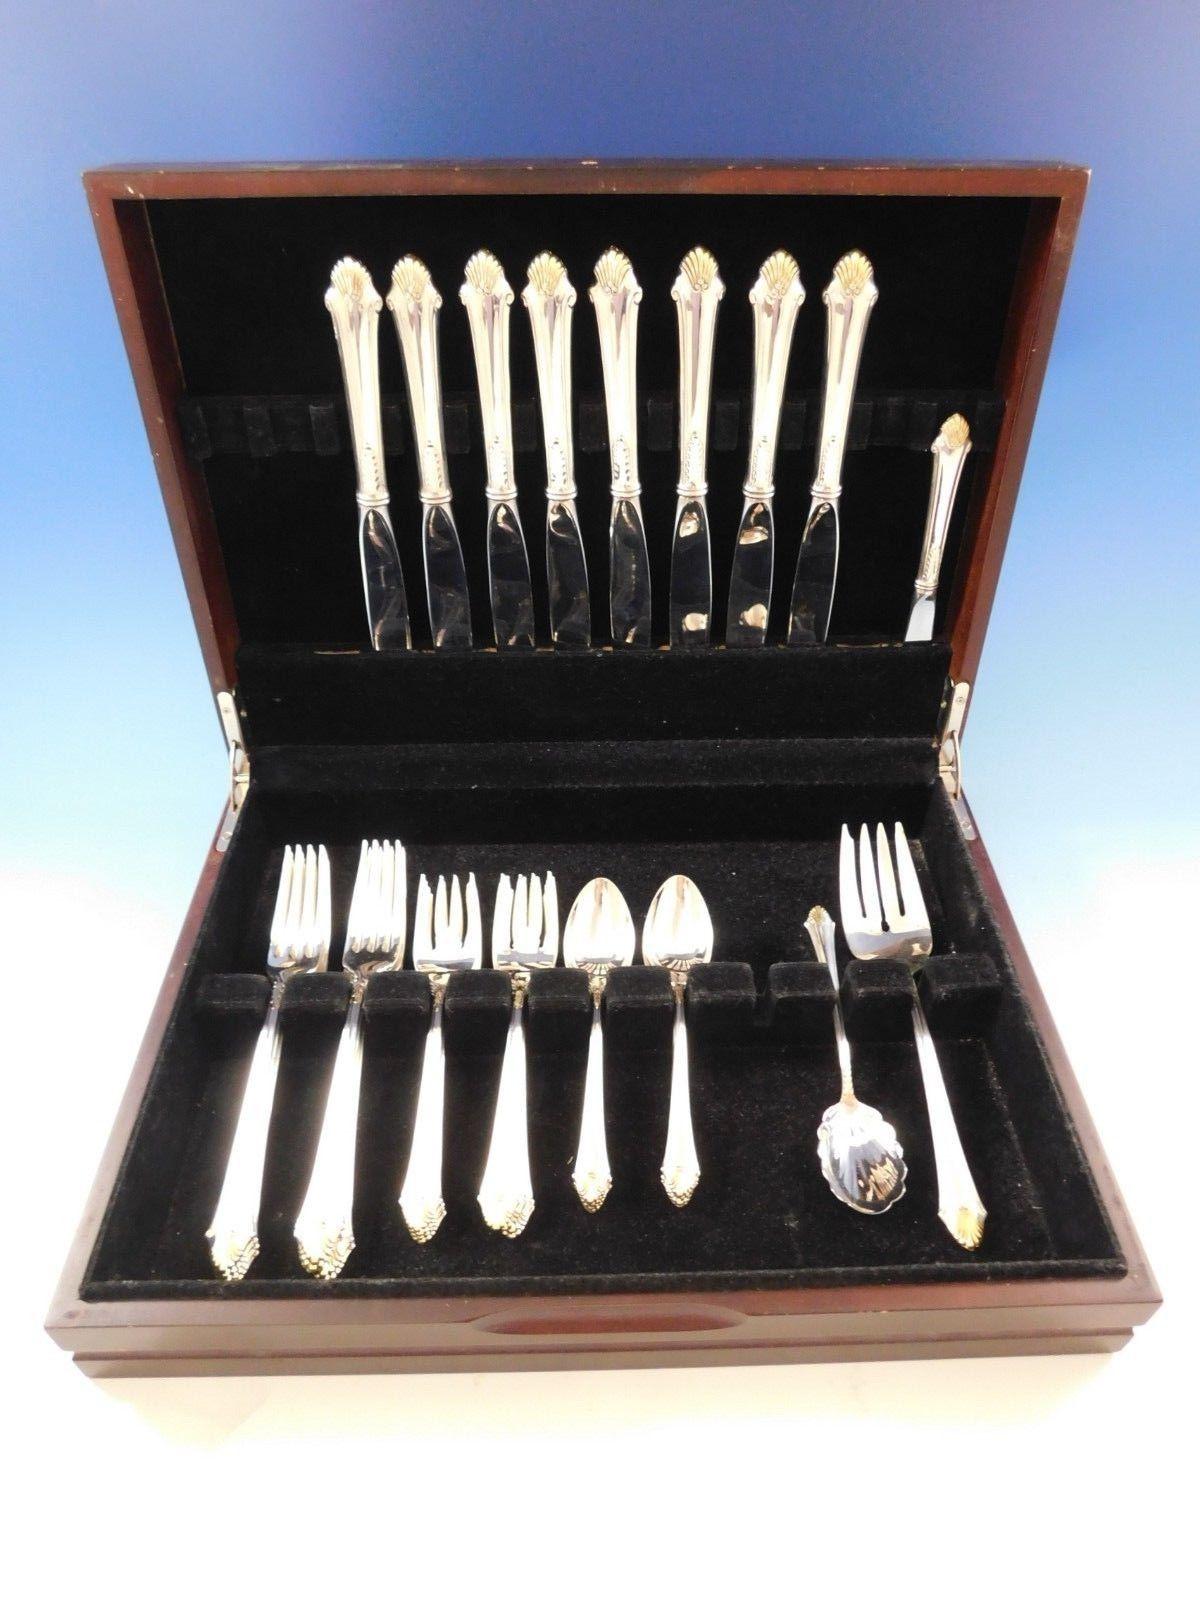 Dinner size estate edgemont gold by Gorham sterling silver flatware set - 35 pieces. This set includes:

Eight dinner size knives, 9 3/8